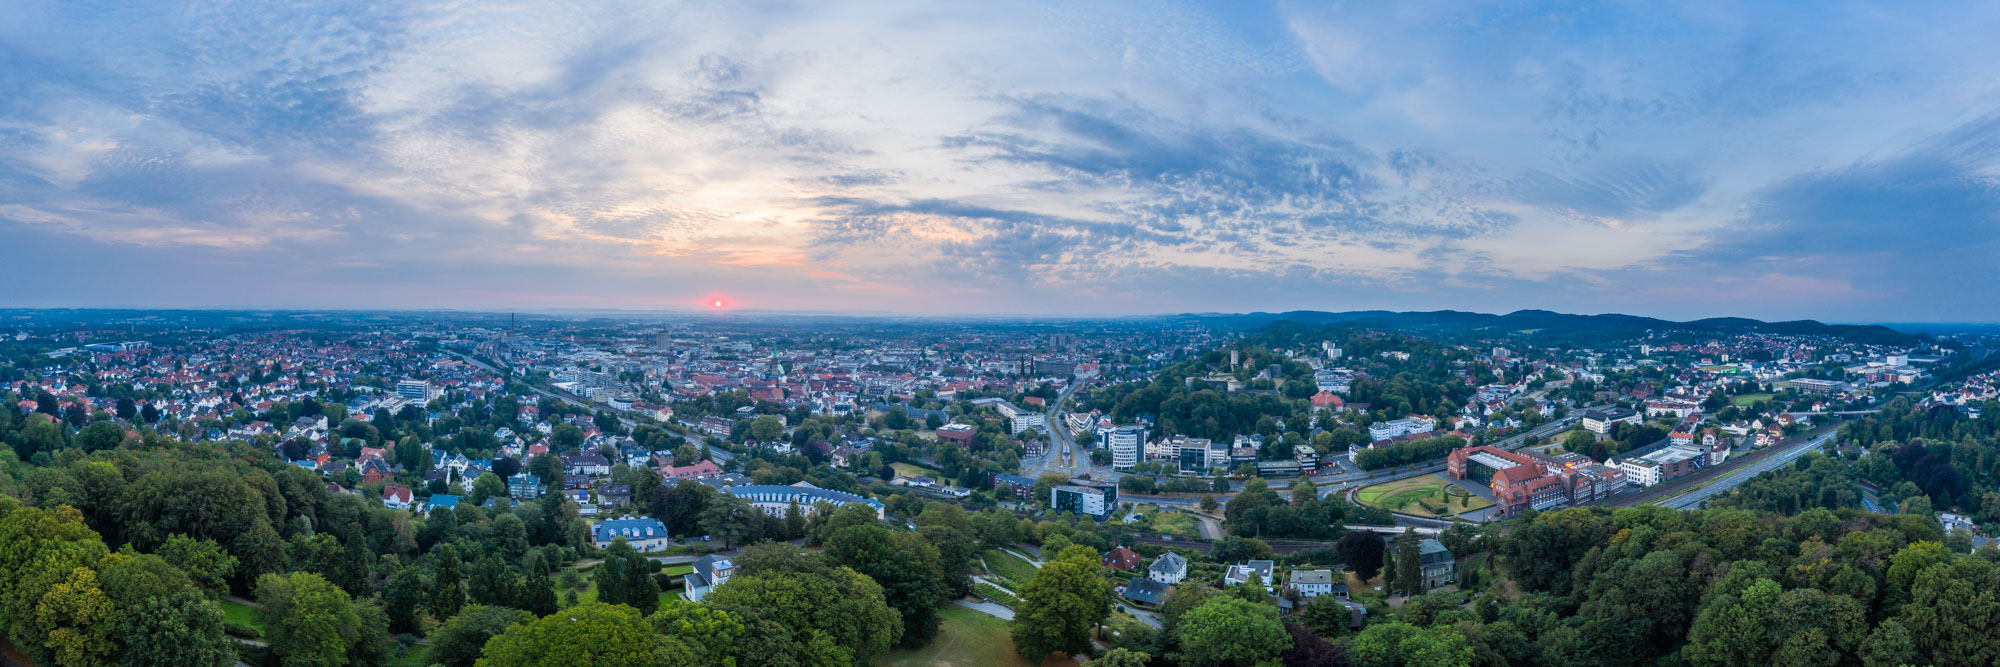 Sunrise over the city centre in August 2020 (Bielefeld, Germany).